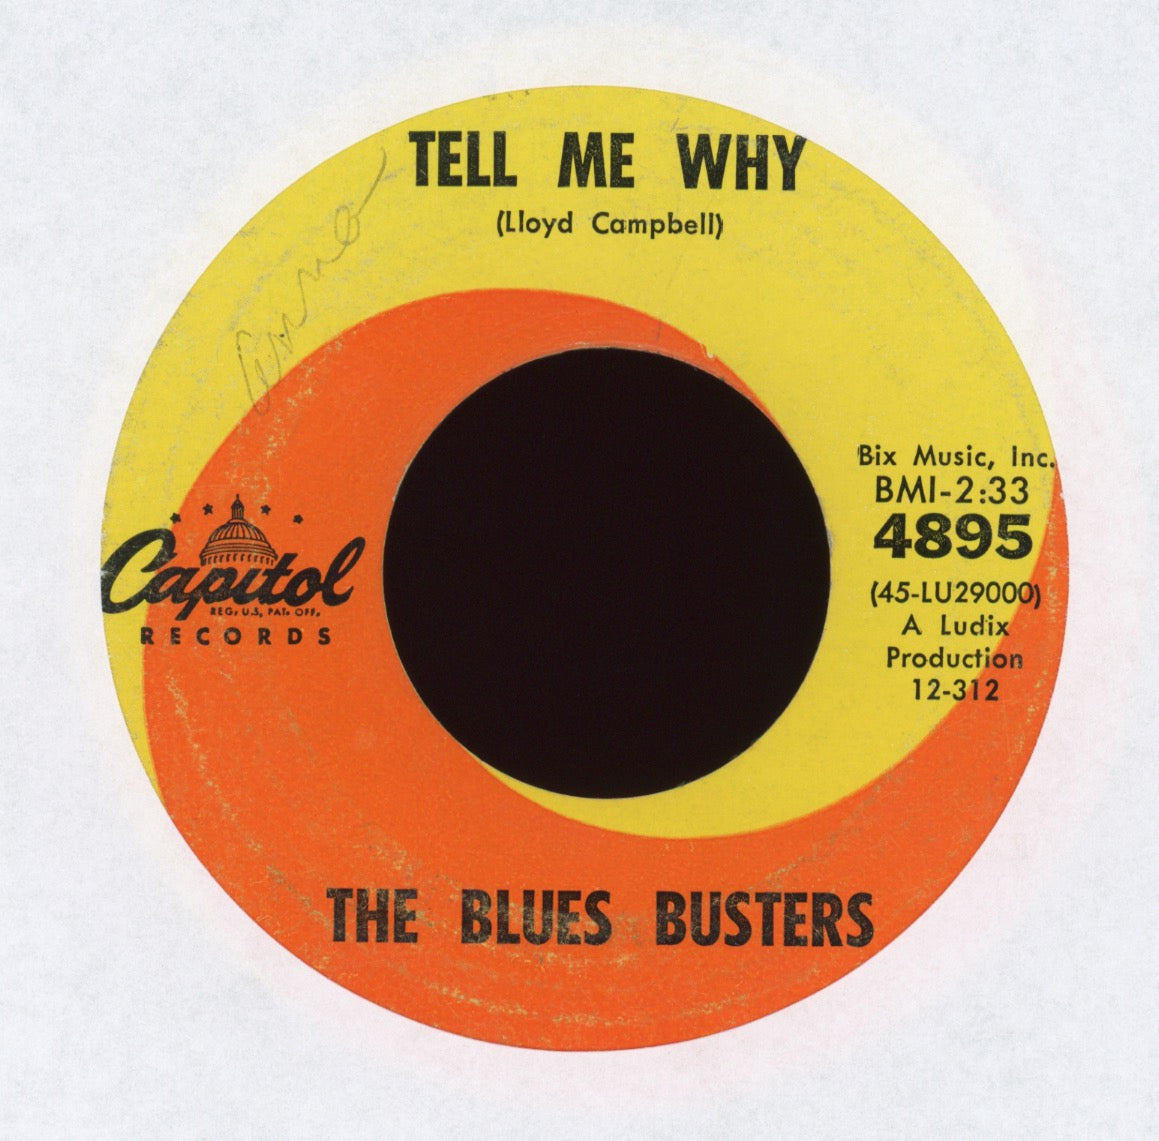 The Blues Busters - Tell My Why on Capitol